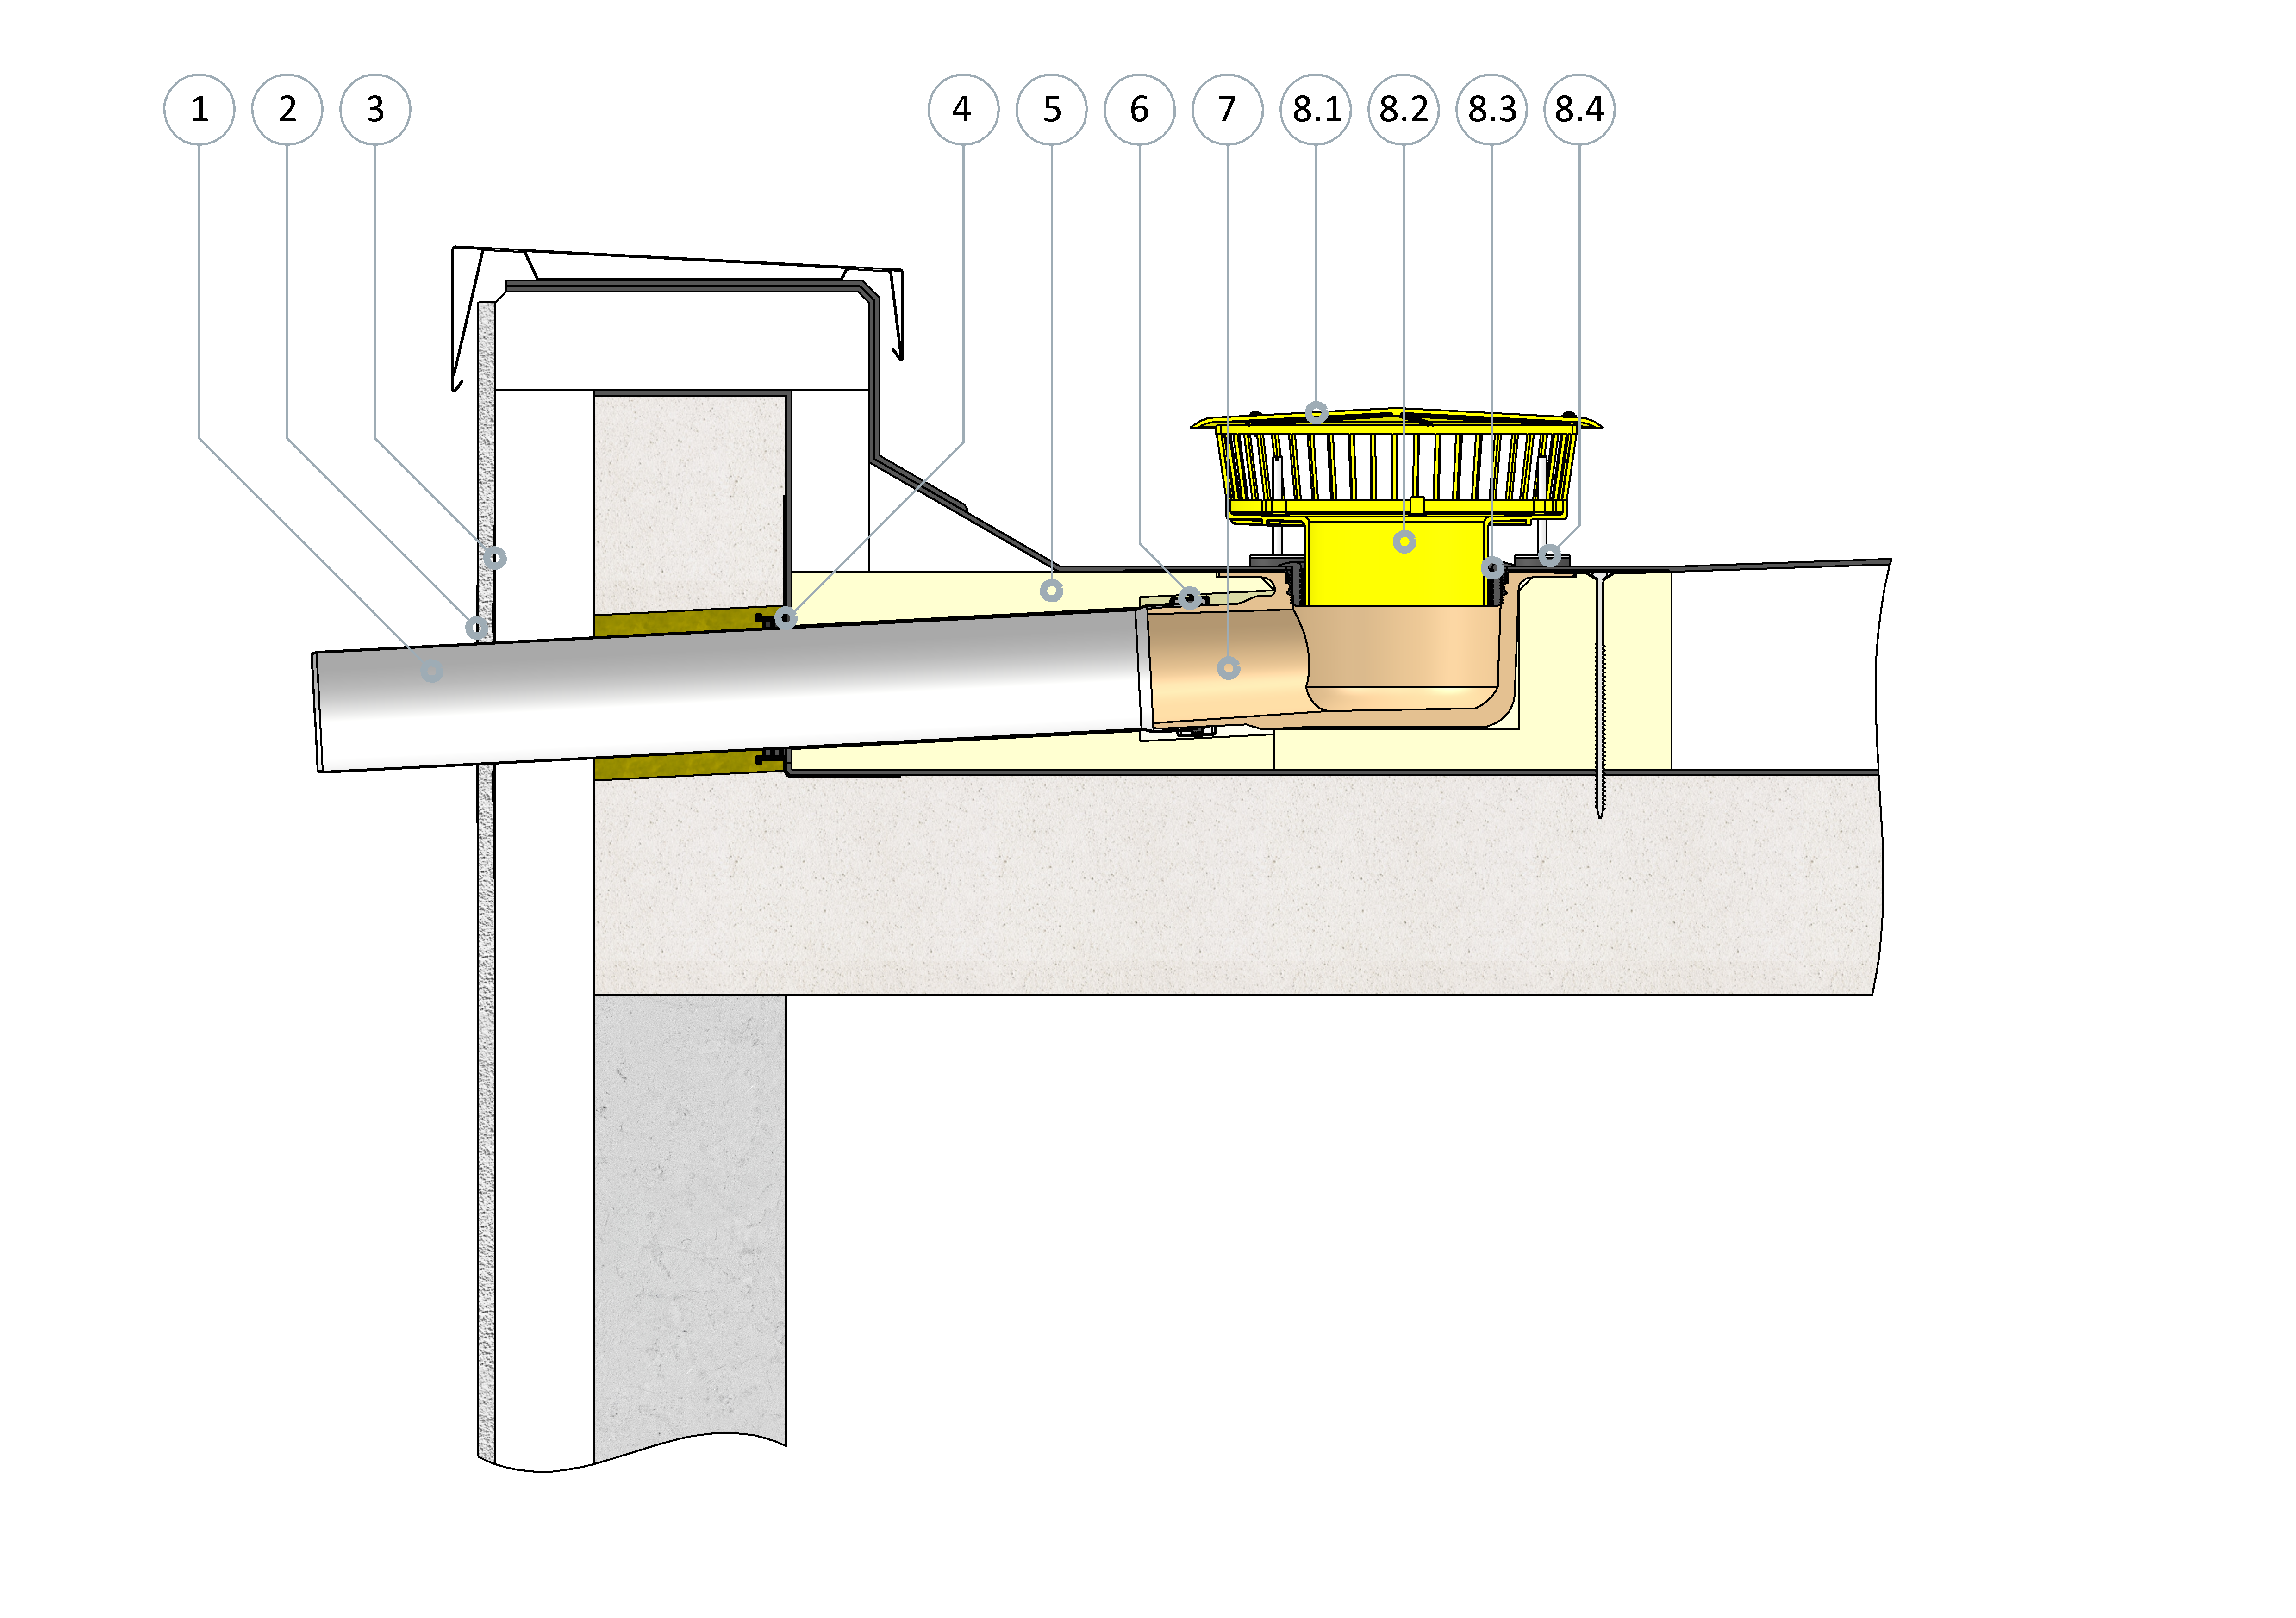 SitaStandard angled as emergency drainage in a non-ventilated roof structure